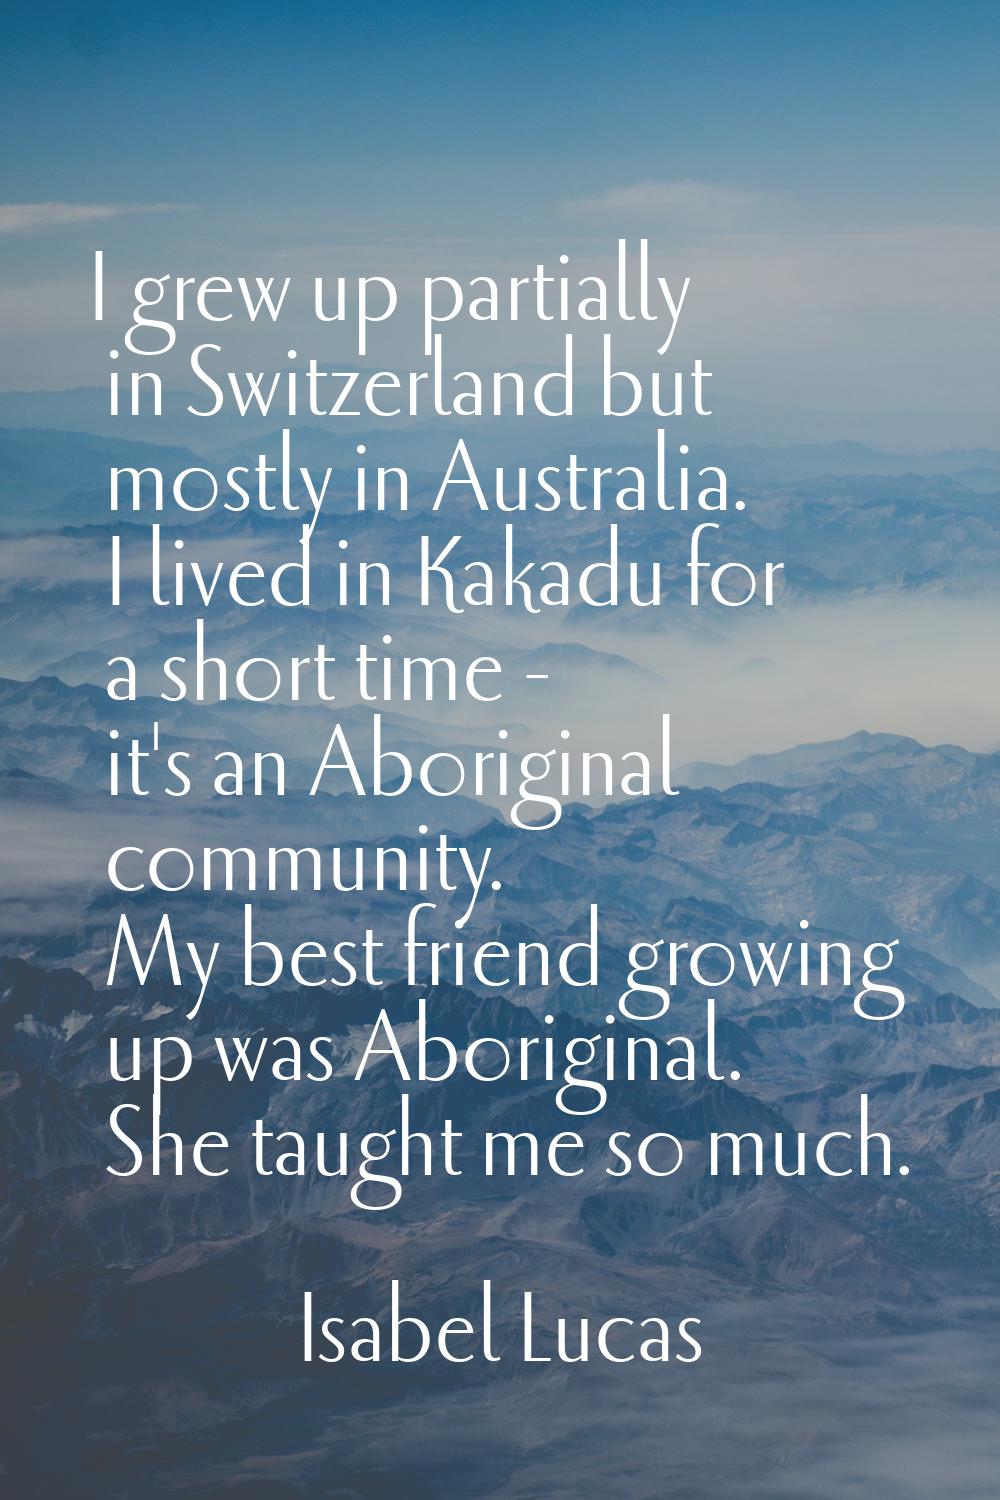 I grew up partially in Switzerland but mostly in Australia. I lived in Kakadu for a short time - it